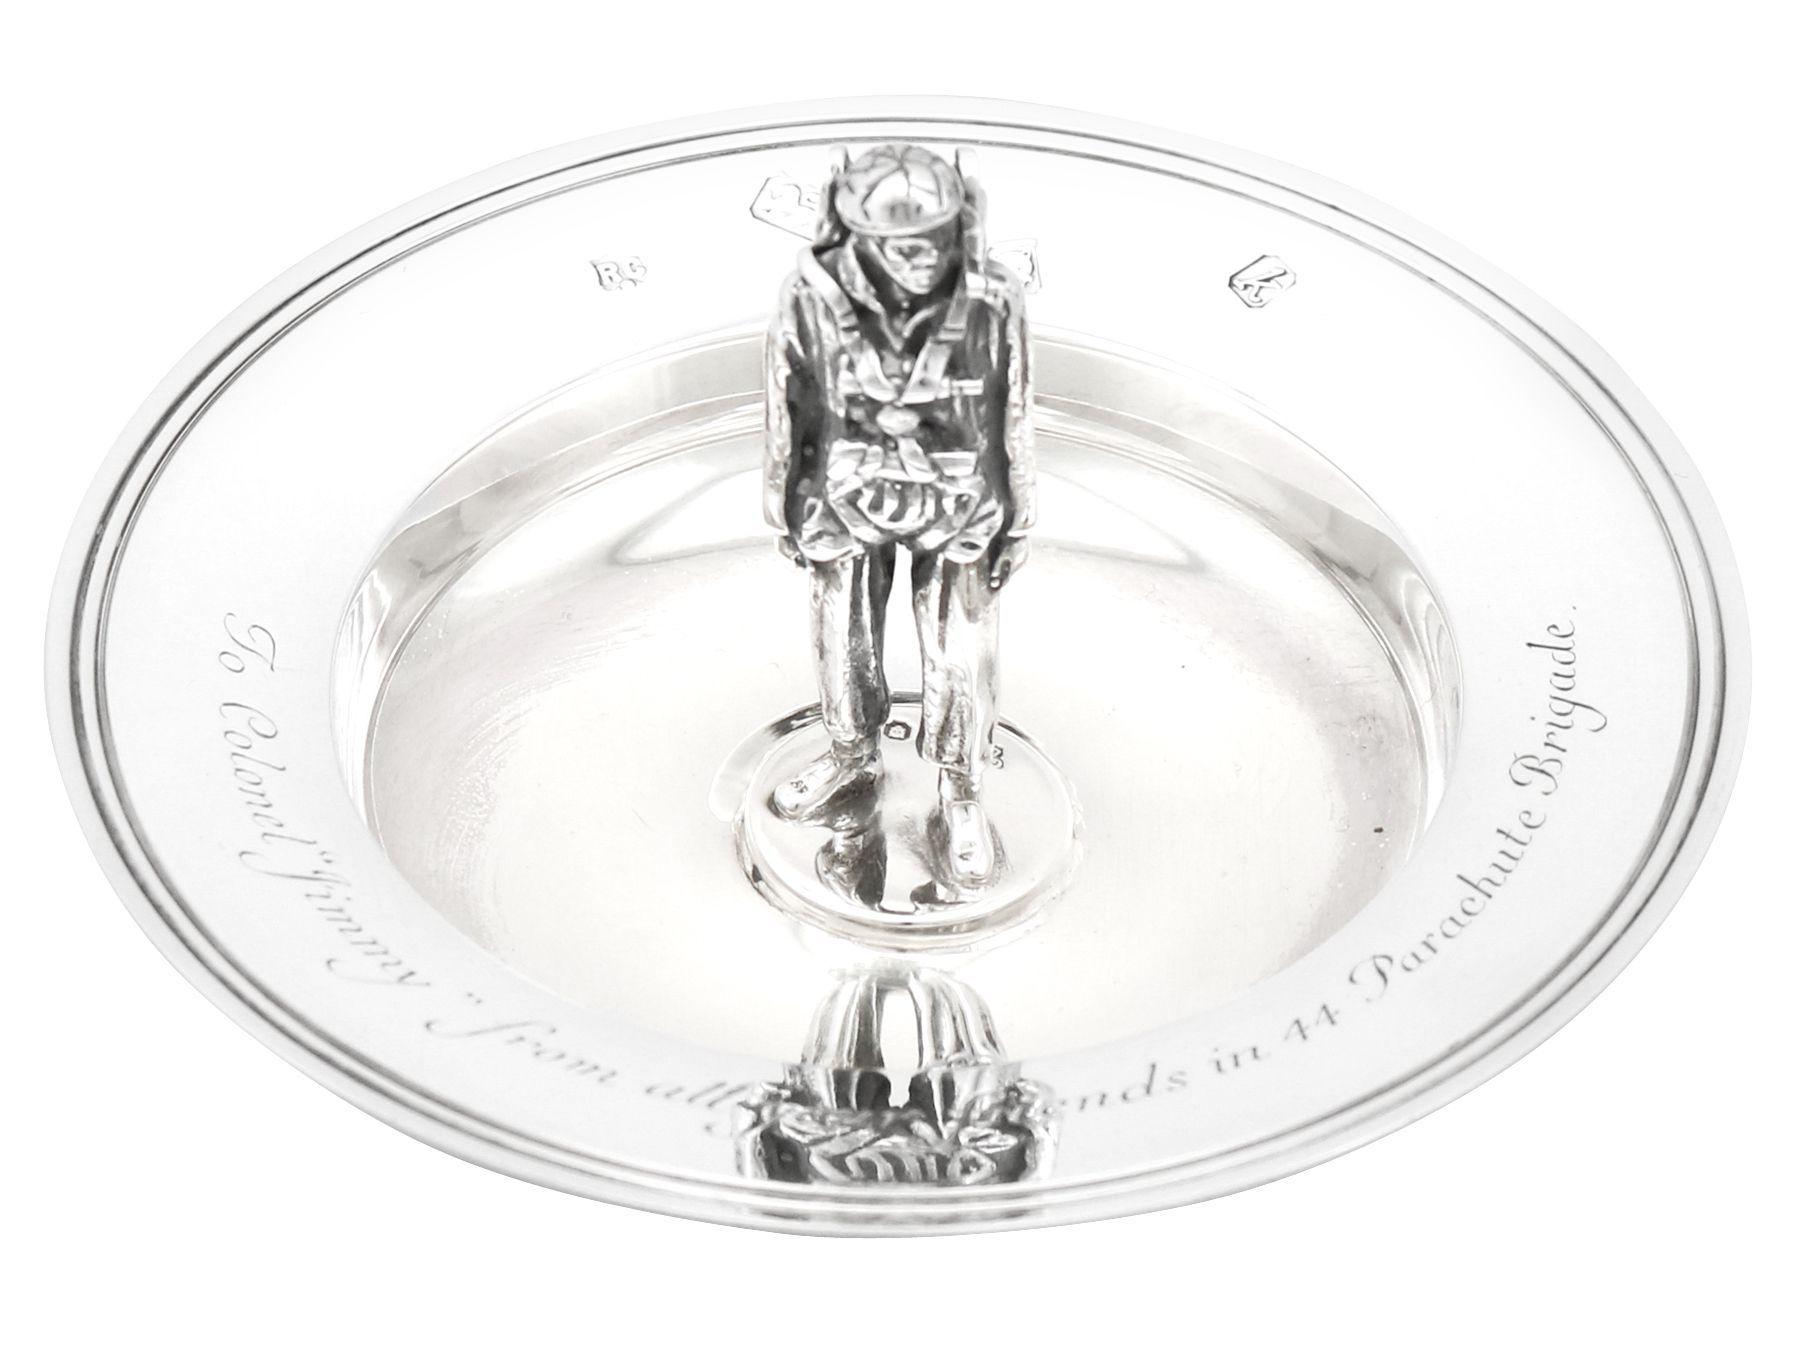 A fine and impressive vintage Elizabeth II English sterling silver presentation bowl made by William Comyns & Sons Ltd; an addition to our silver dining collection.

This fine vintage Elizabeth II sterling silver presentation bowl has a circular